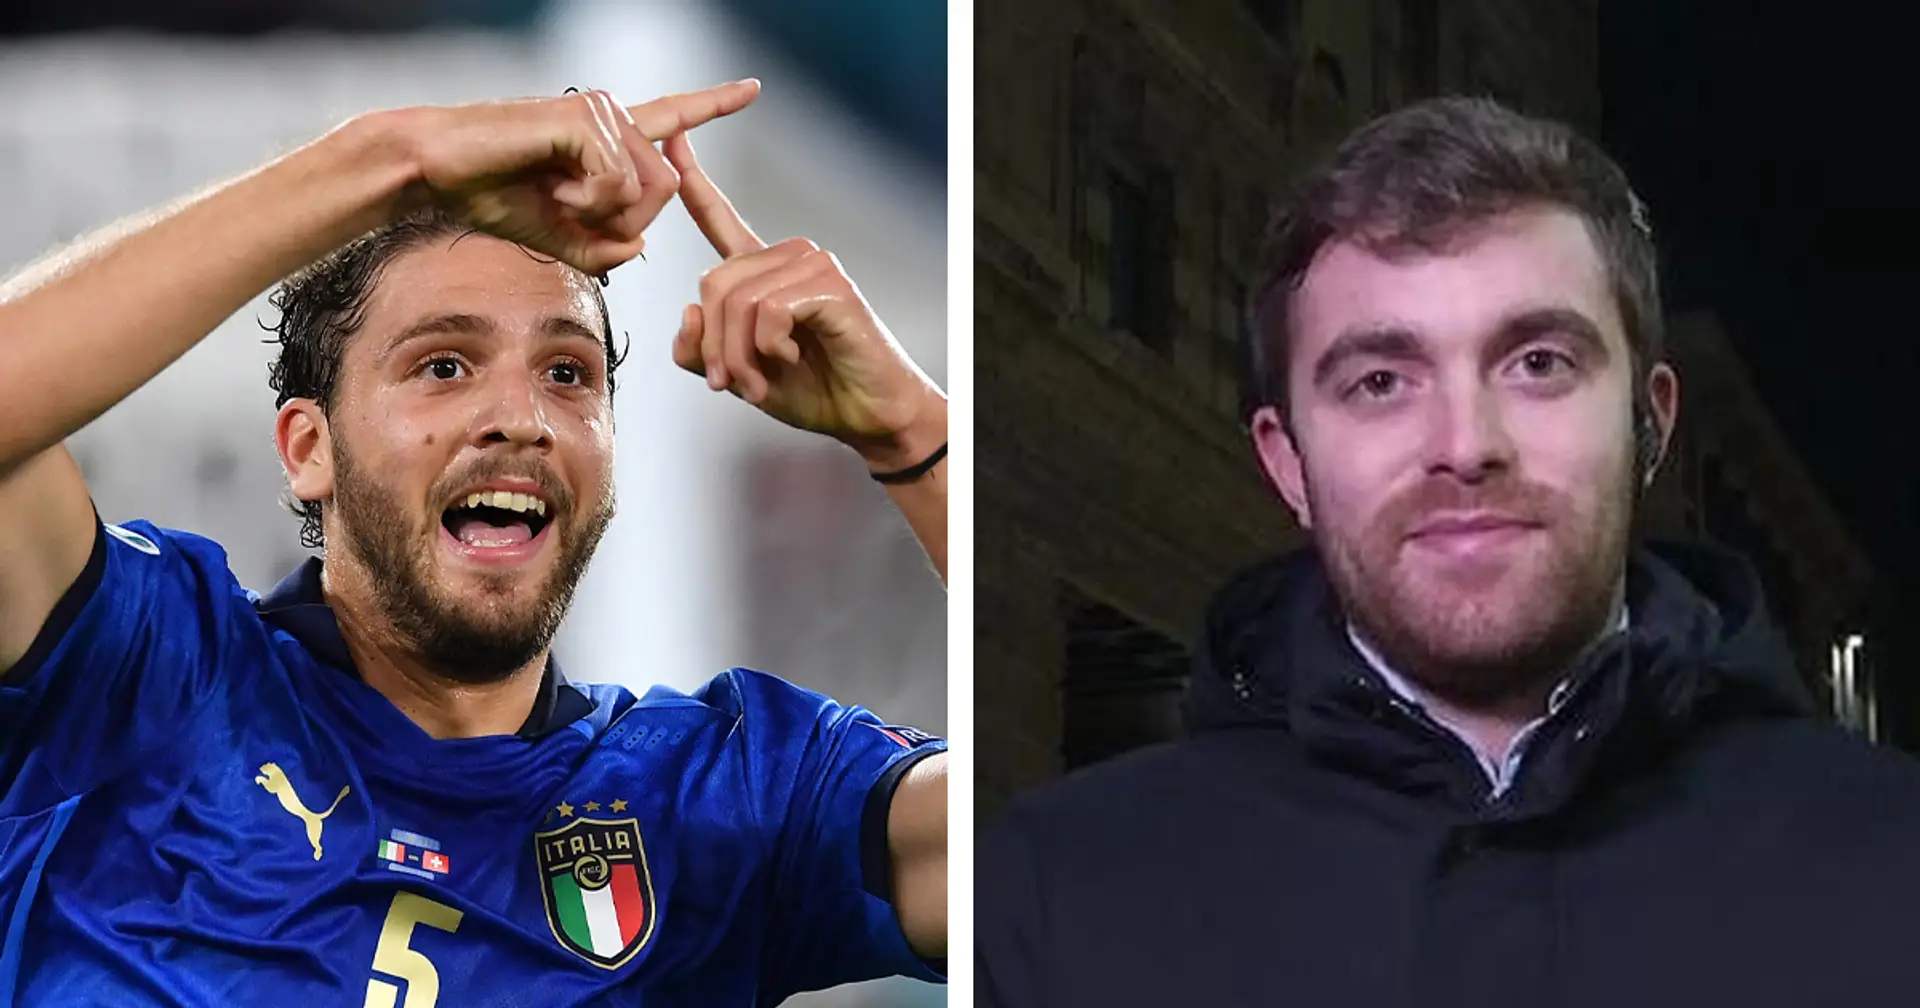 Chelsea 'scouting' Italy sensation Manuel Locatelli but not favourites to sign him - Fabrizio Romano (reliability: 5 stars)